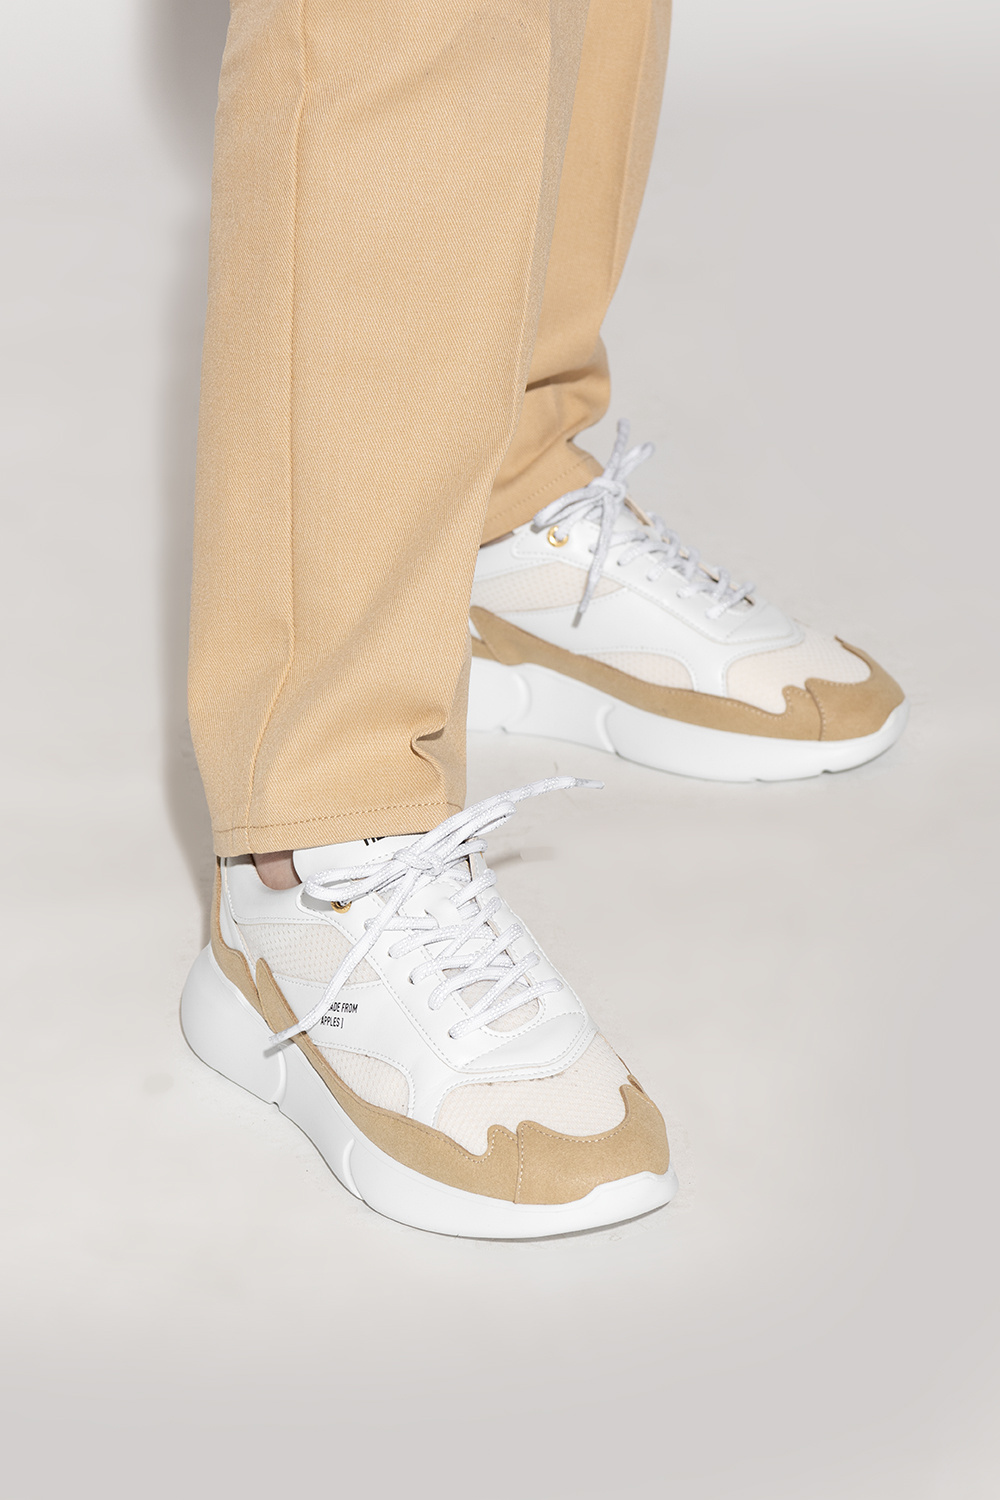 Mercer Amsterdam ‘W3RD’ sneakers from vegan leather | Women's Shoes ...